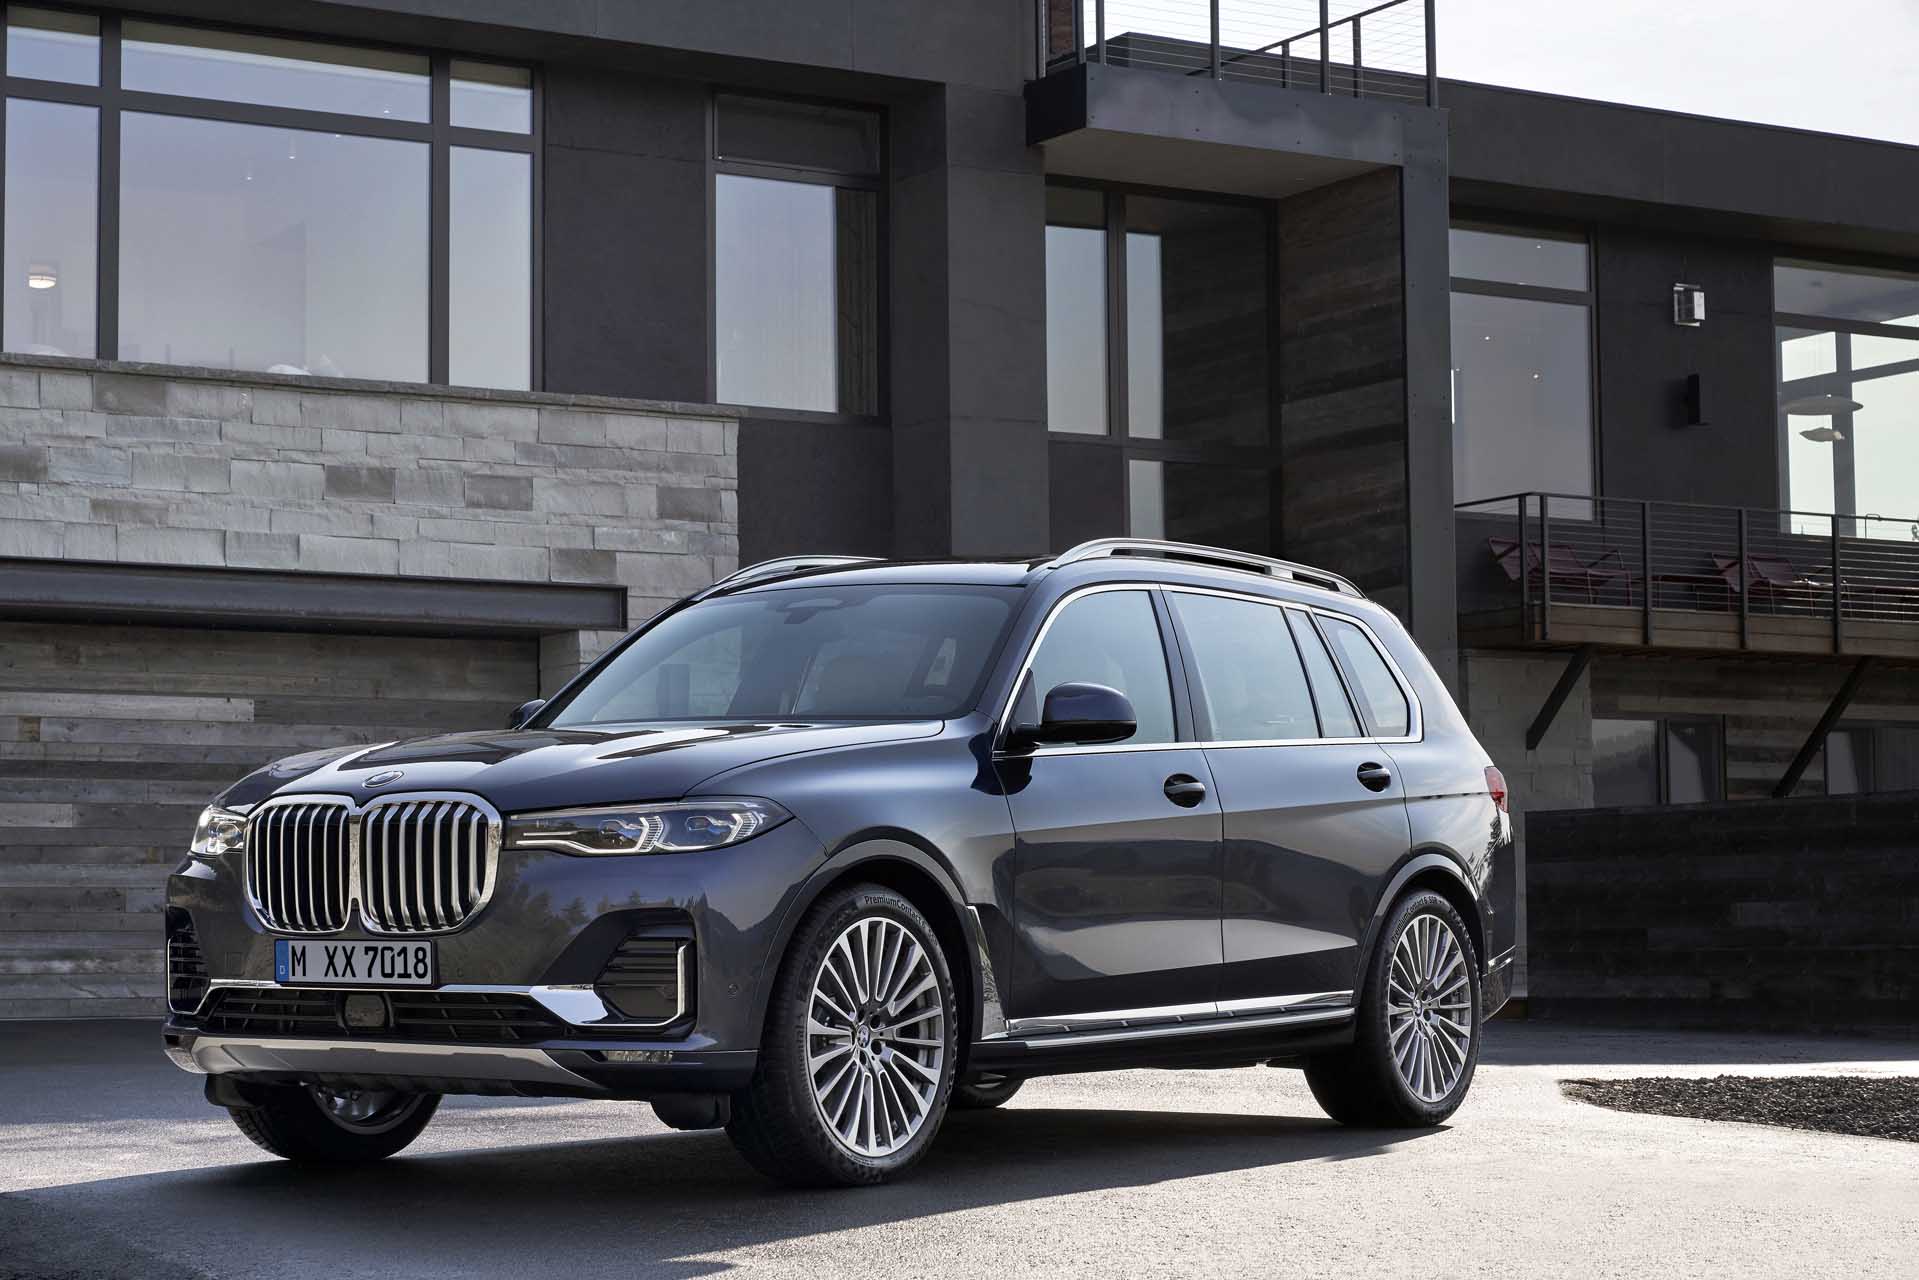 2020 BMW X7 Review, Ratings, Specs, Prices, and Photos - The Car Connection